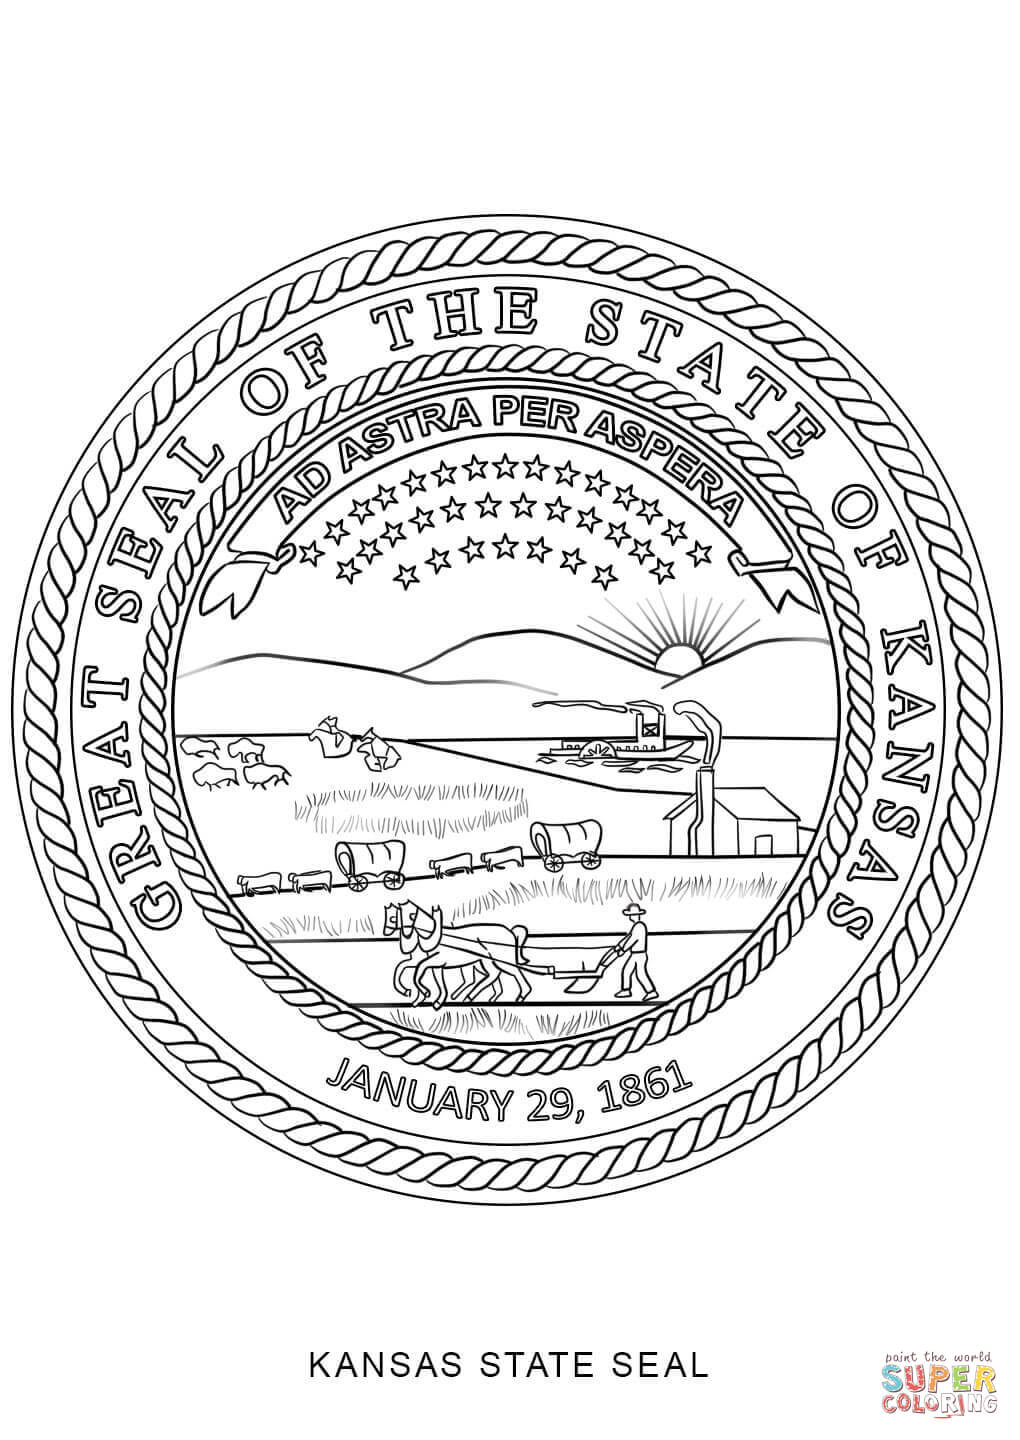 Kansas state seal coloring page free printable coloring pages